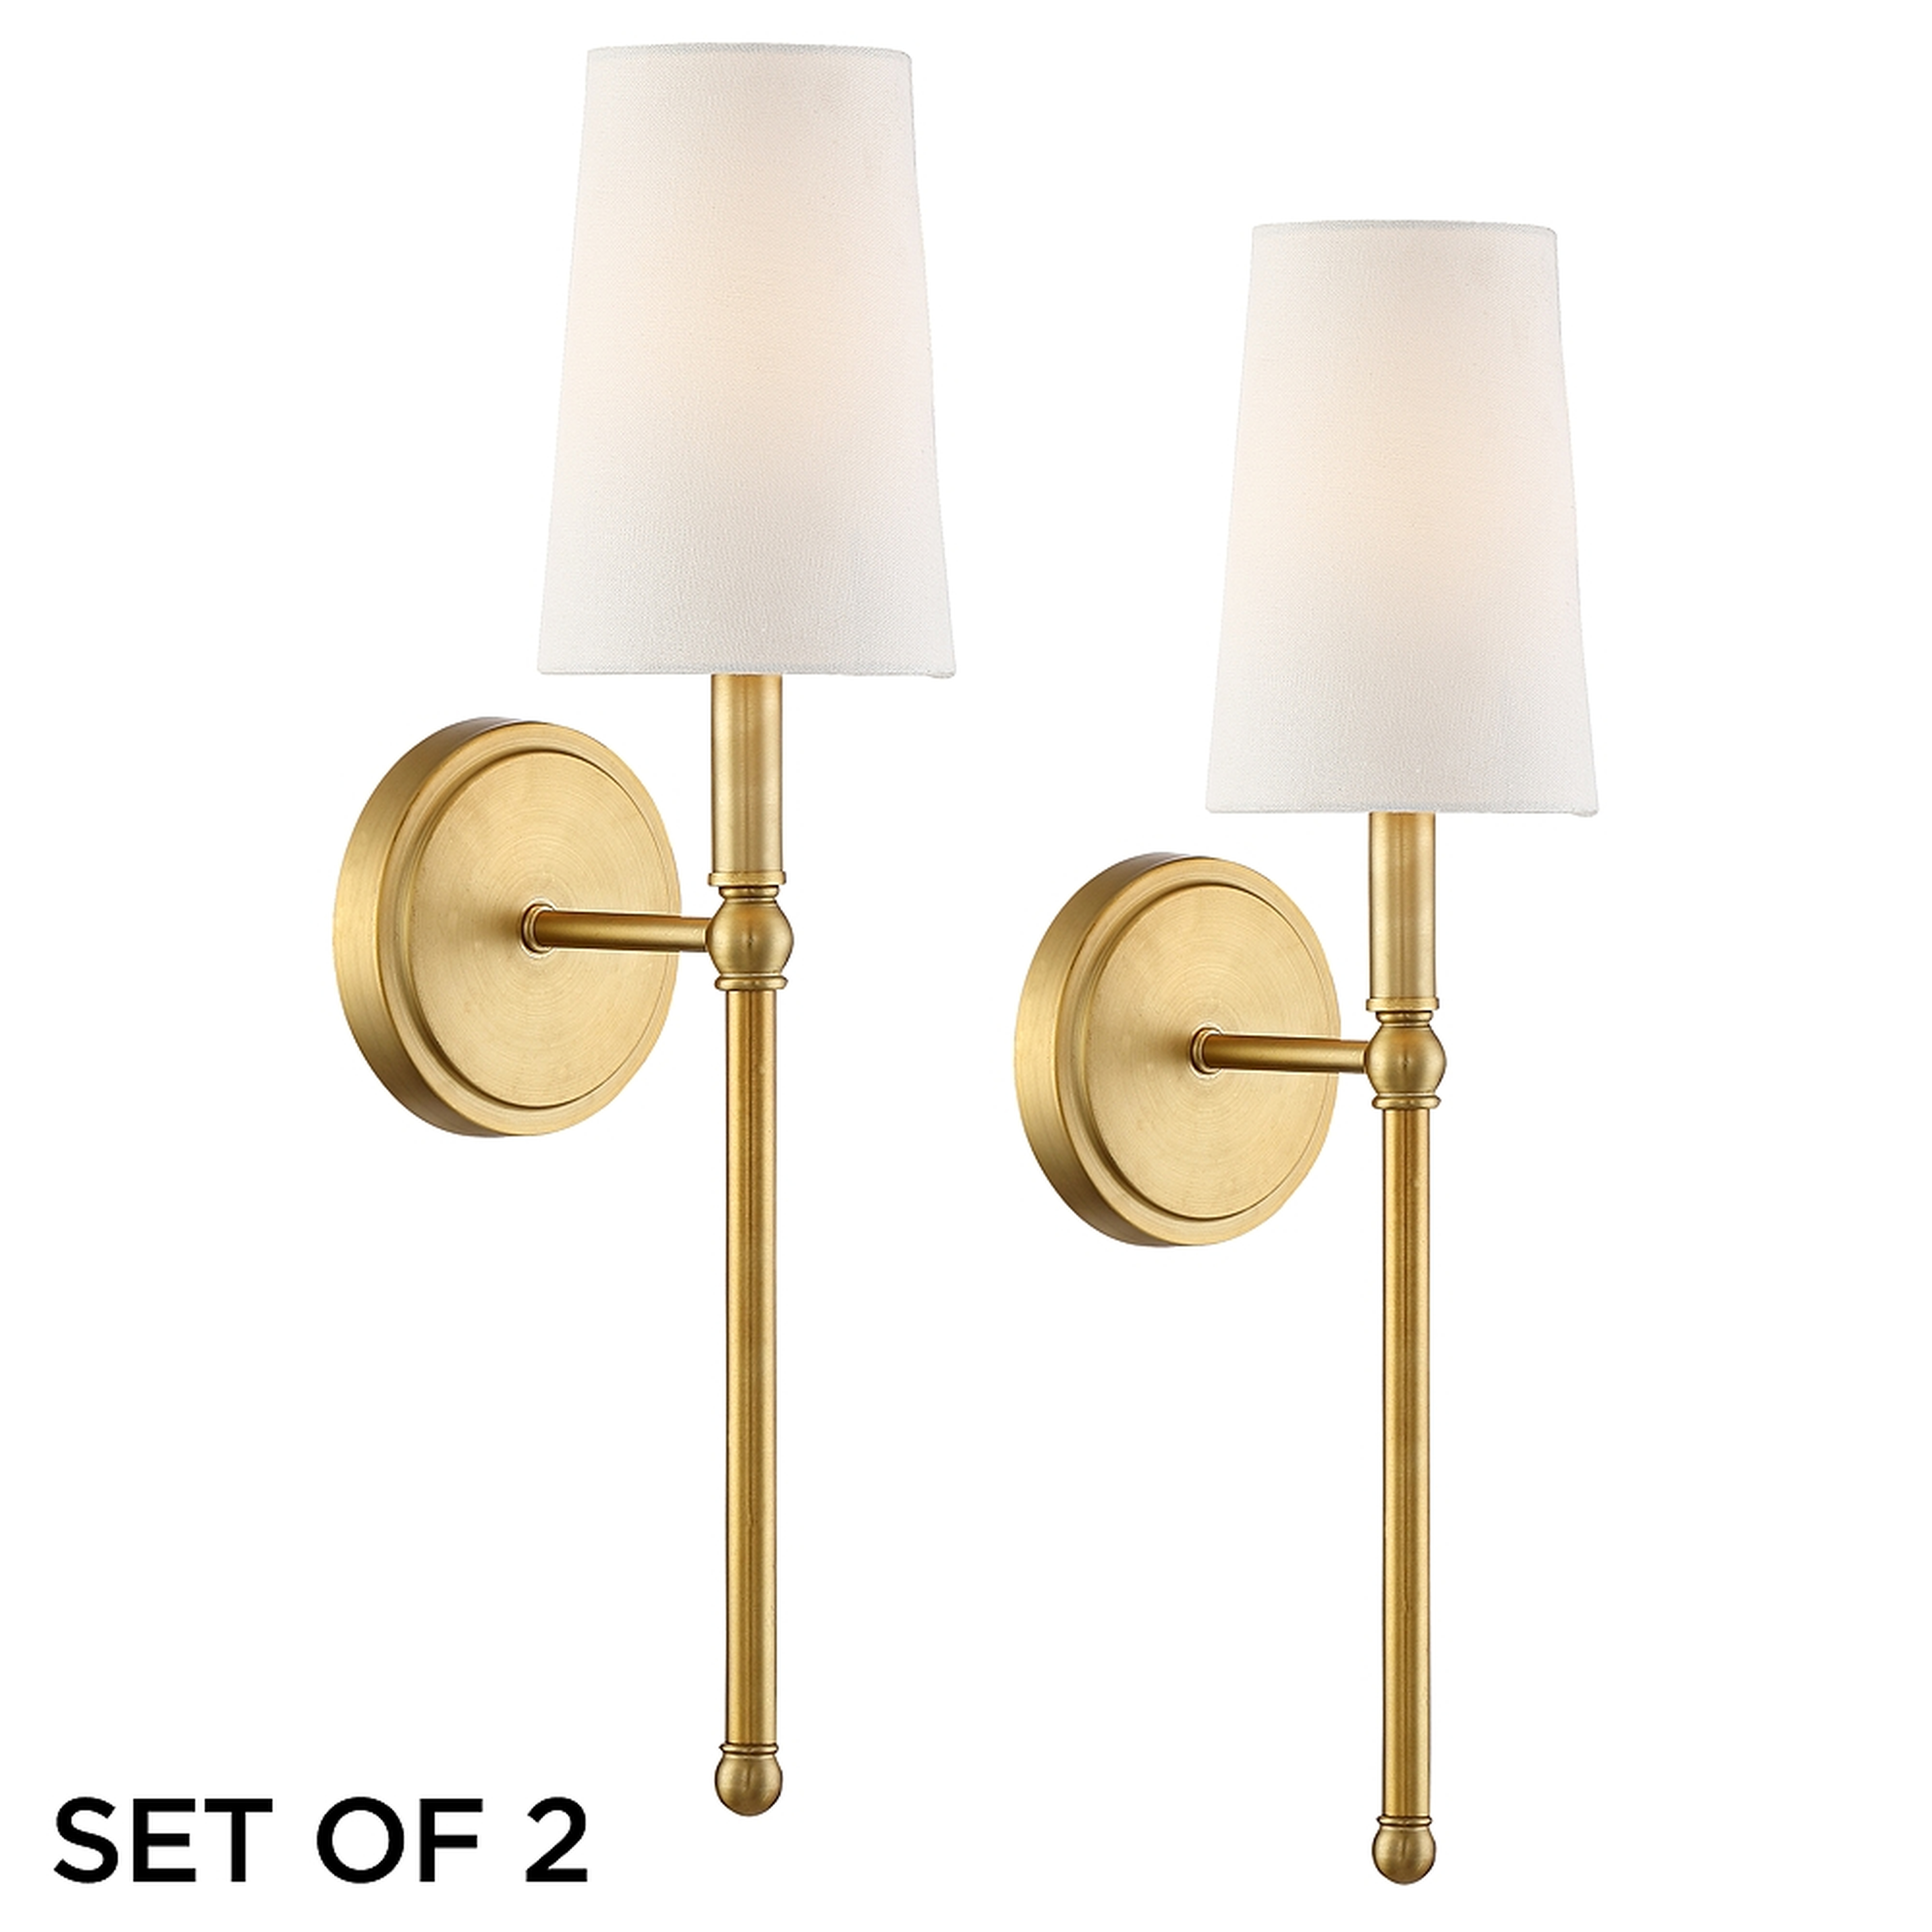 Greta 21" High Warm Brass Wall Sconces Set of 2 - Style # 73D45 - Lamps Plus